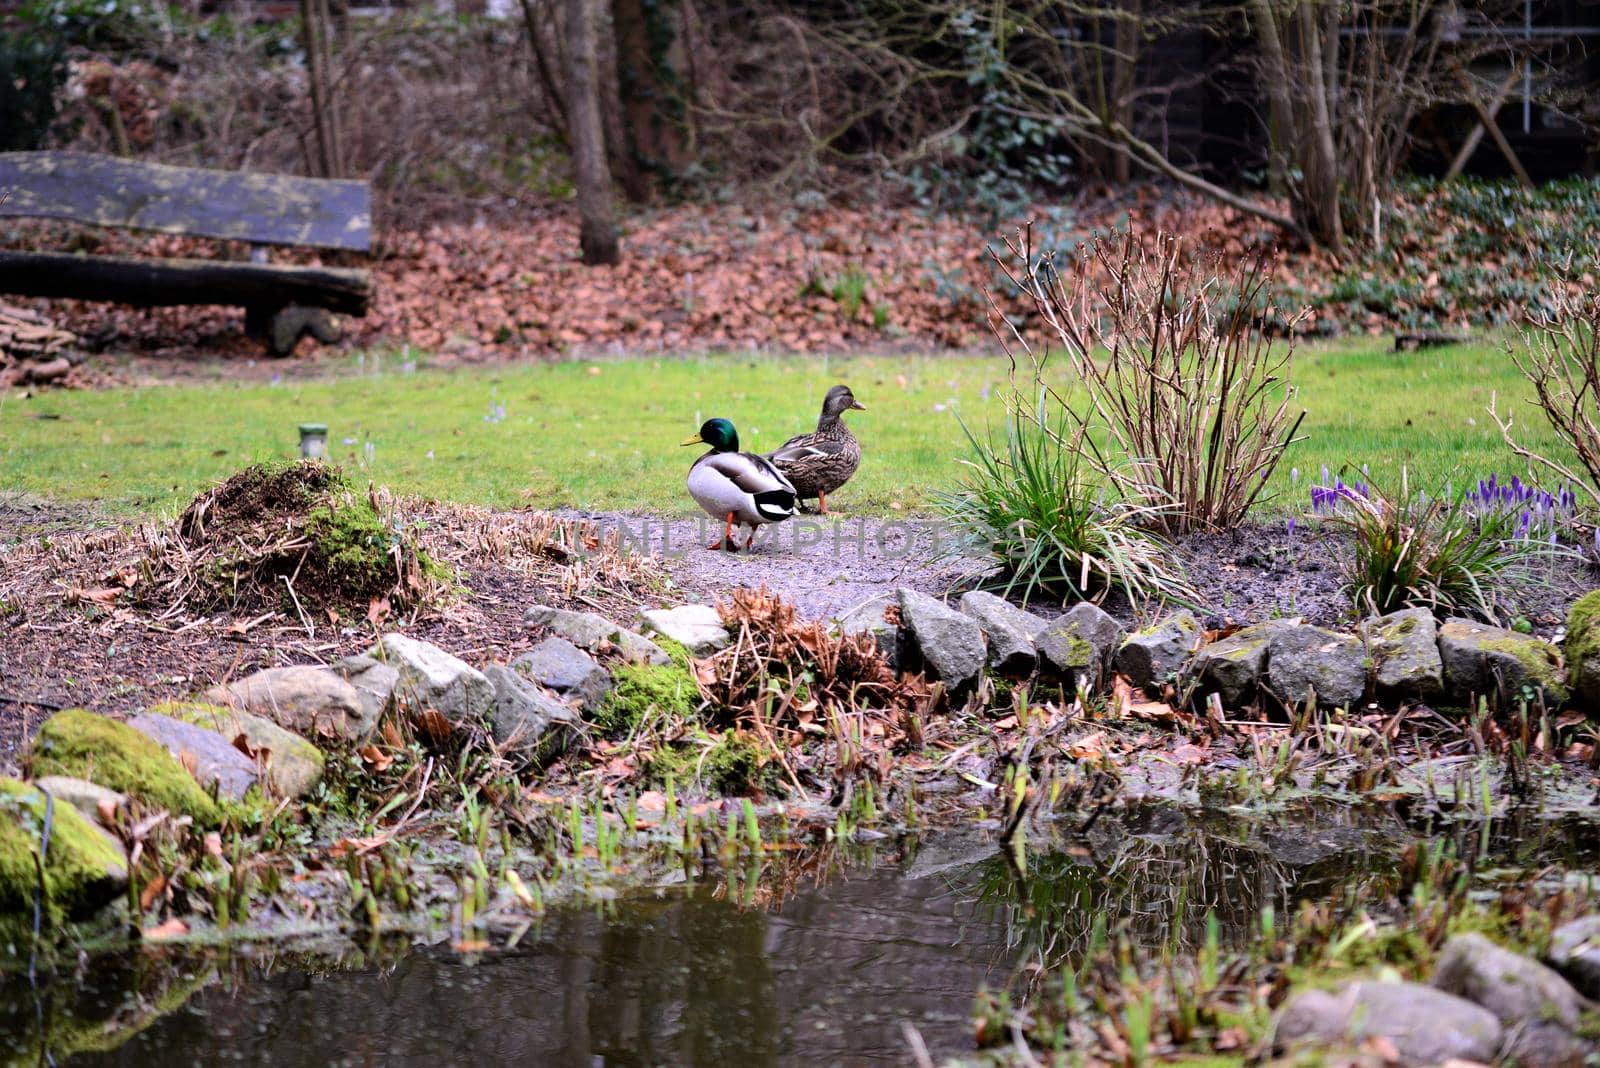 A couple of stalled ducks in a garden behind a small pond